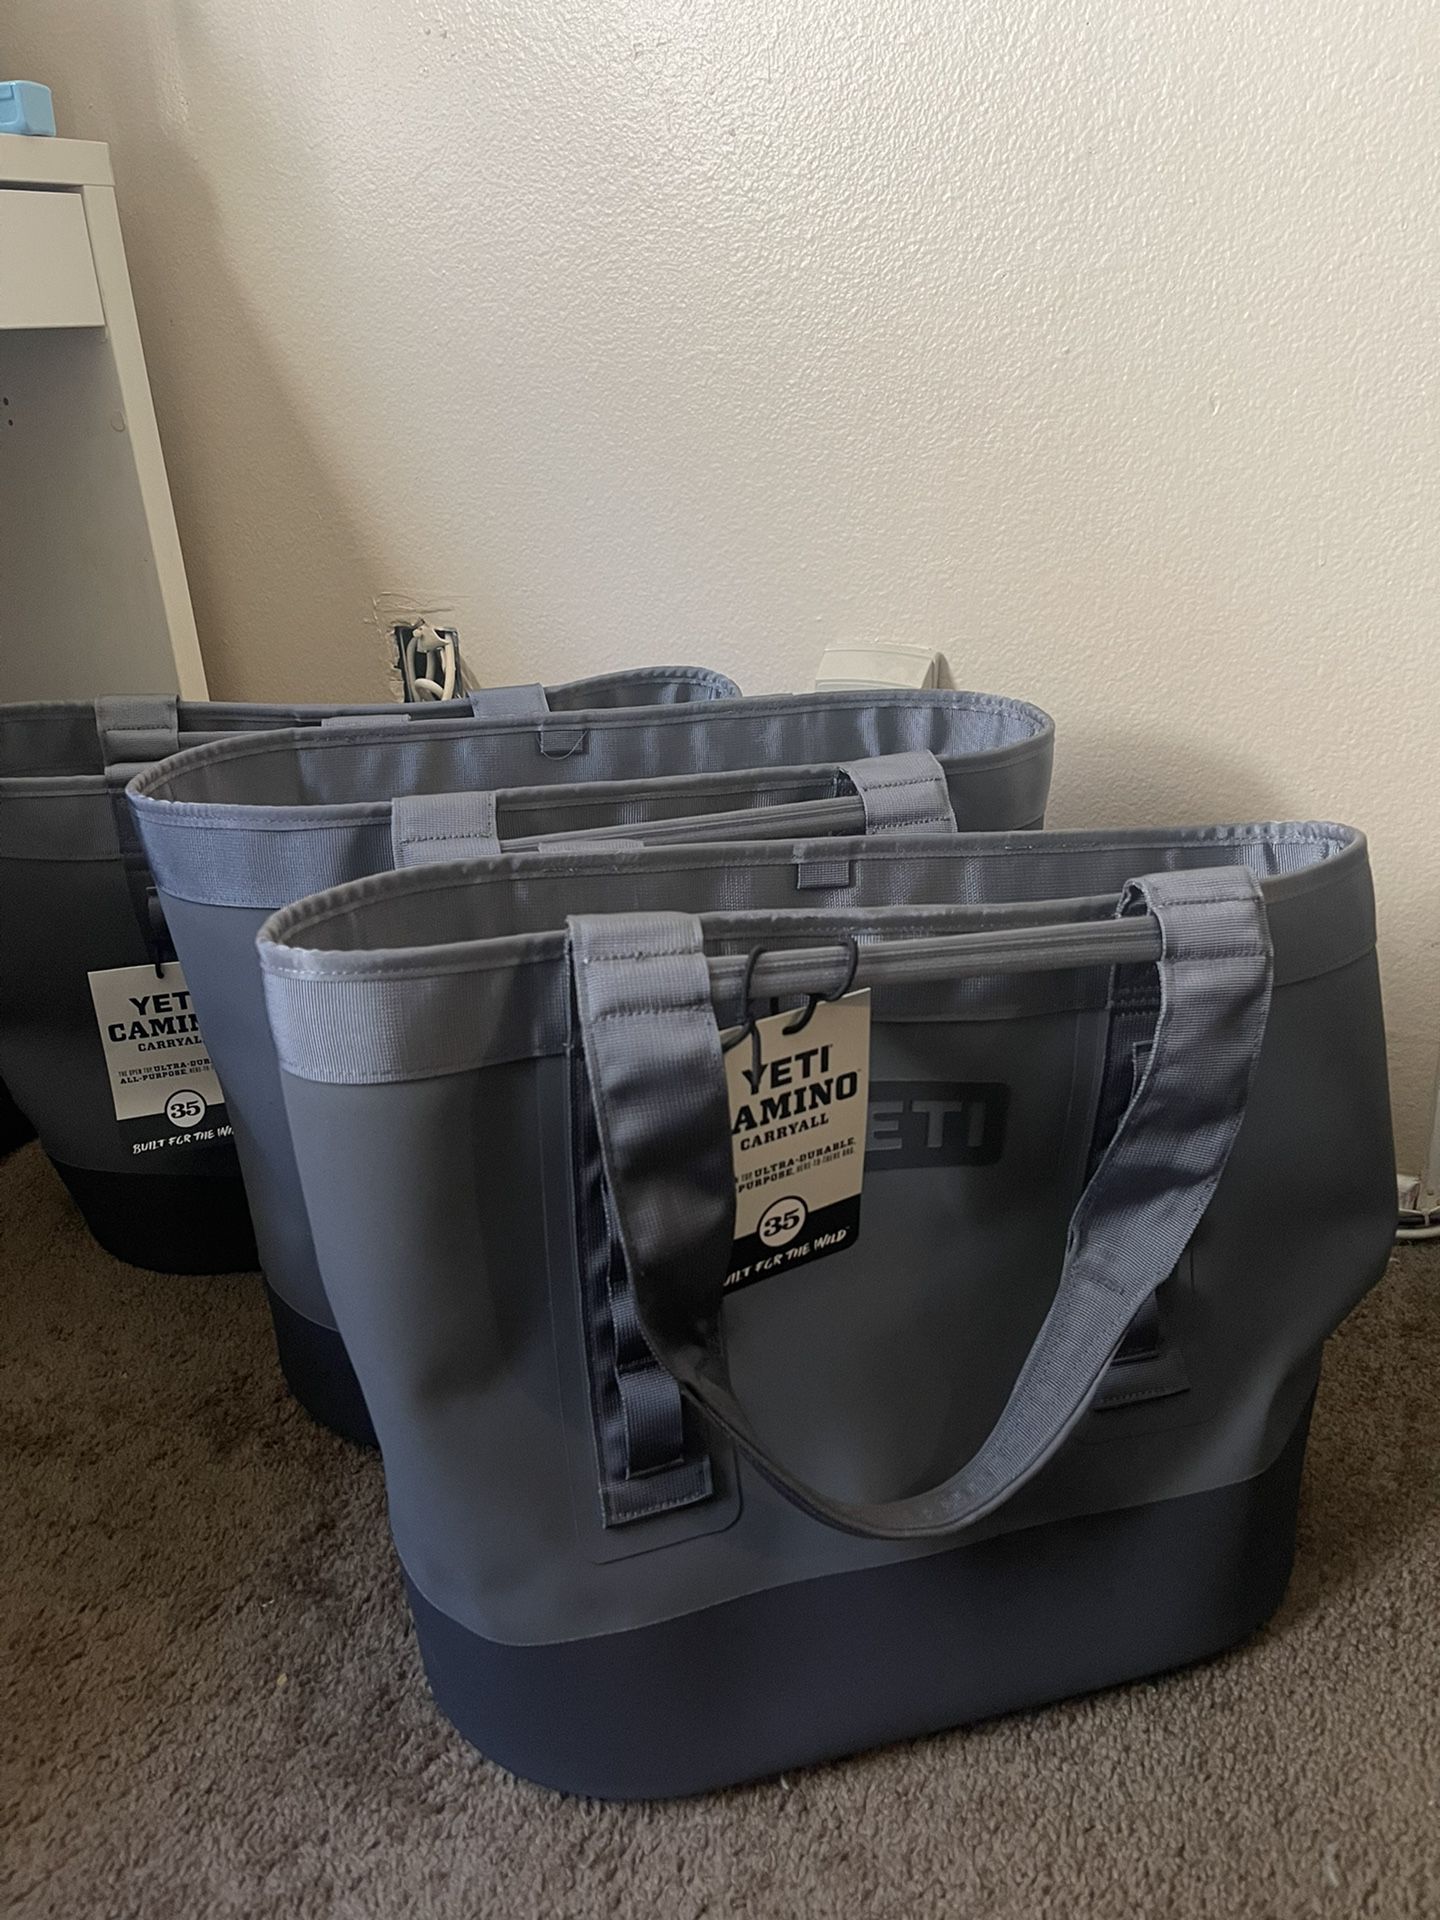 Budget Geniu YETI CAMINO 35 CARRYALL EACH!! (Original Price $149.99 Without  tax) for Sale in Burbank, CA - OfferUp, yeti carryall 35 